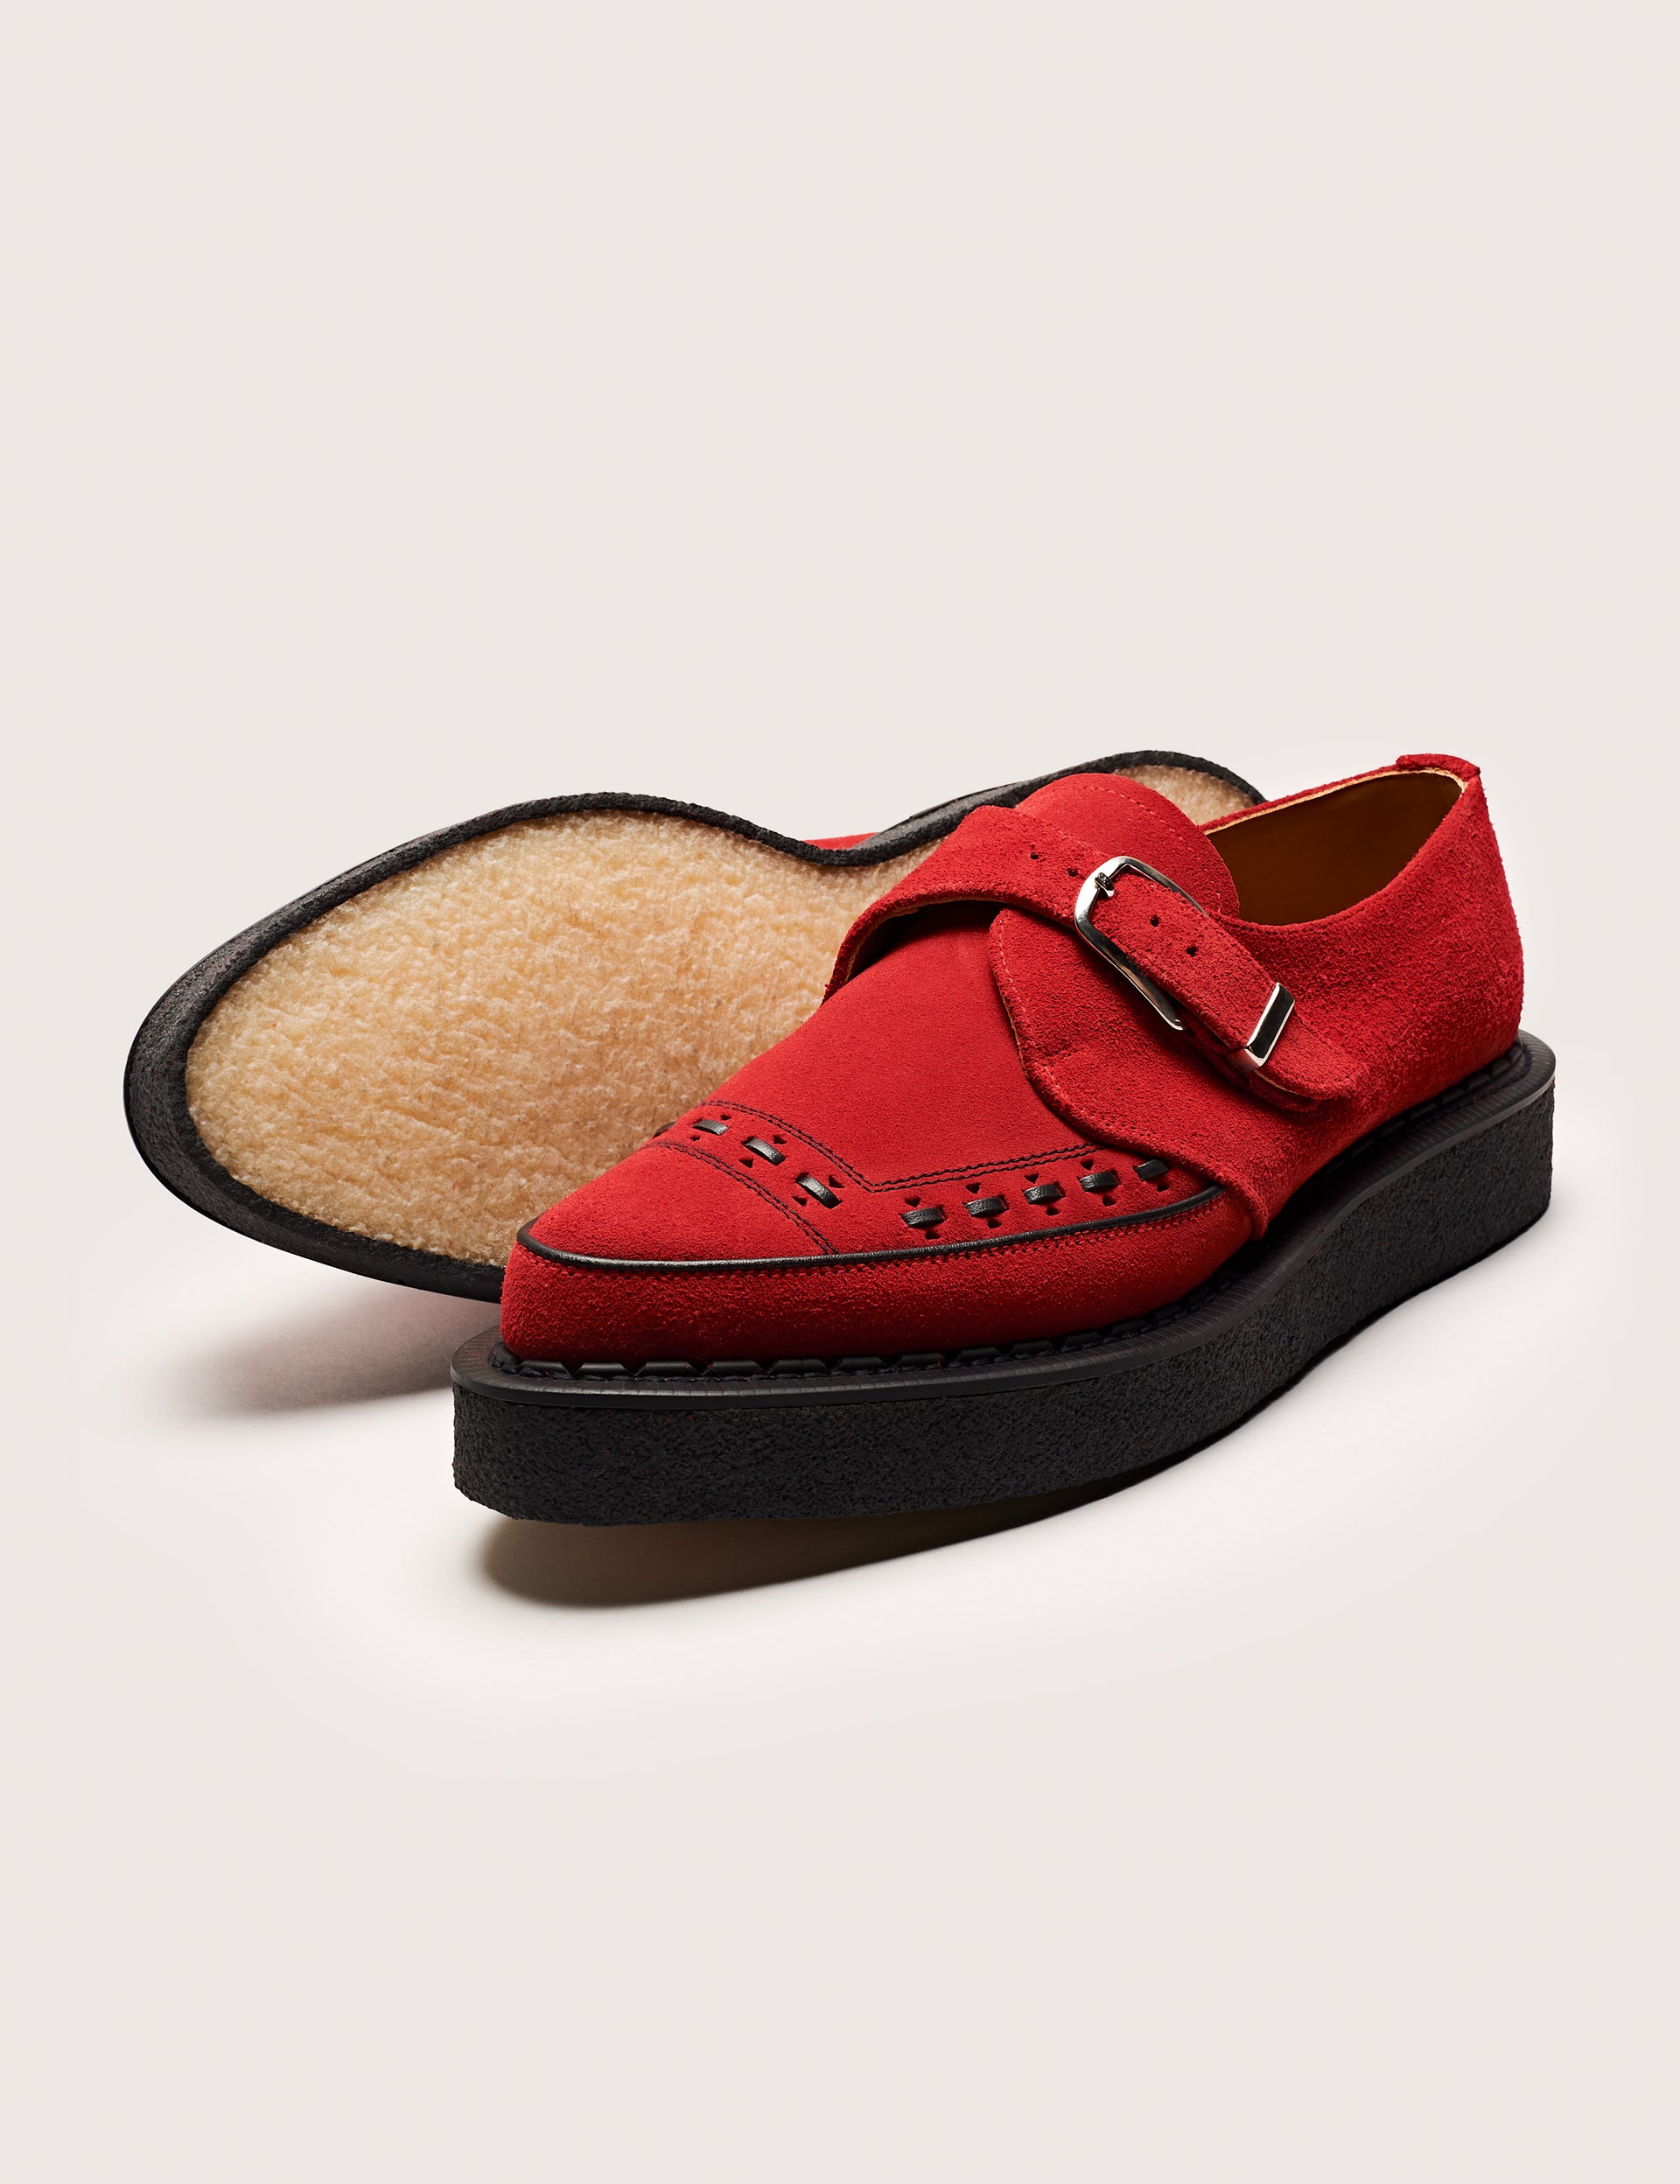 Diano Monk Red Suede